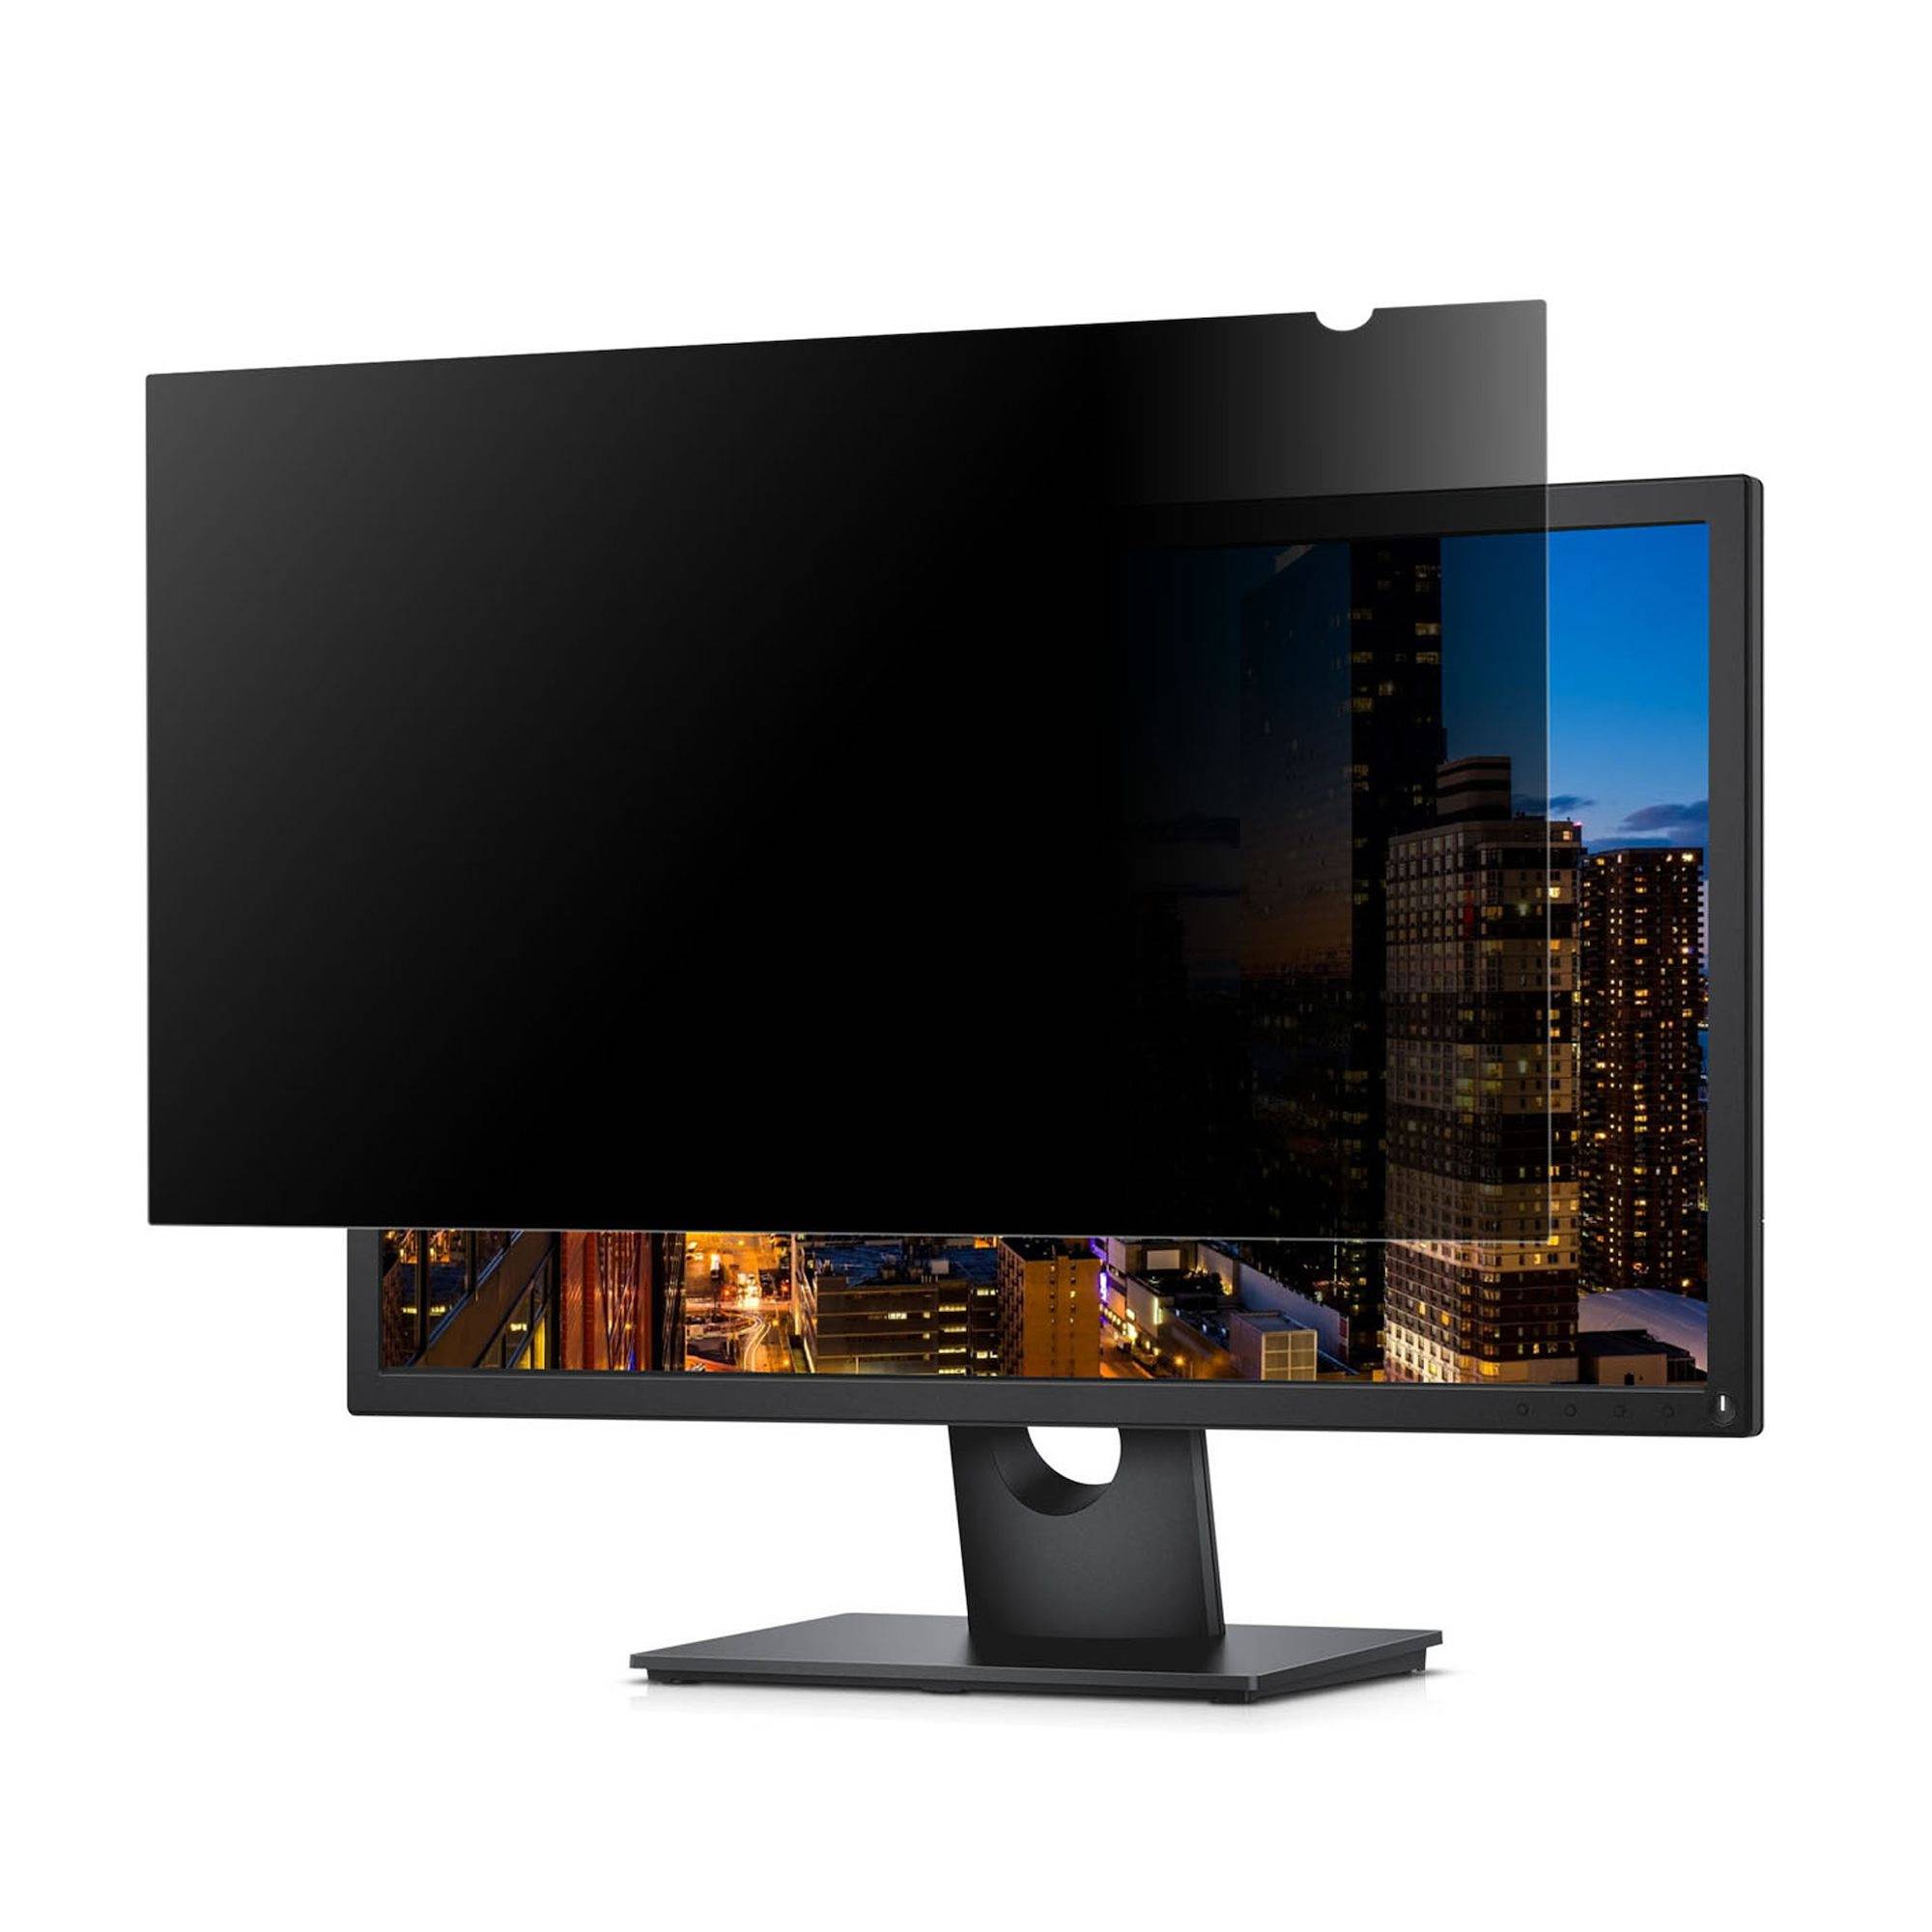 Rca Informatique - Image du produit : 24IN MONITOR PRIVACY SCREEN - UNIVERSAL - MATTE OR GLOSSY